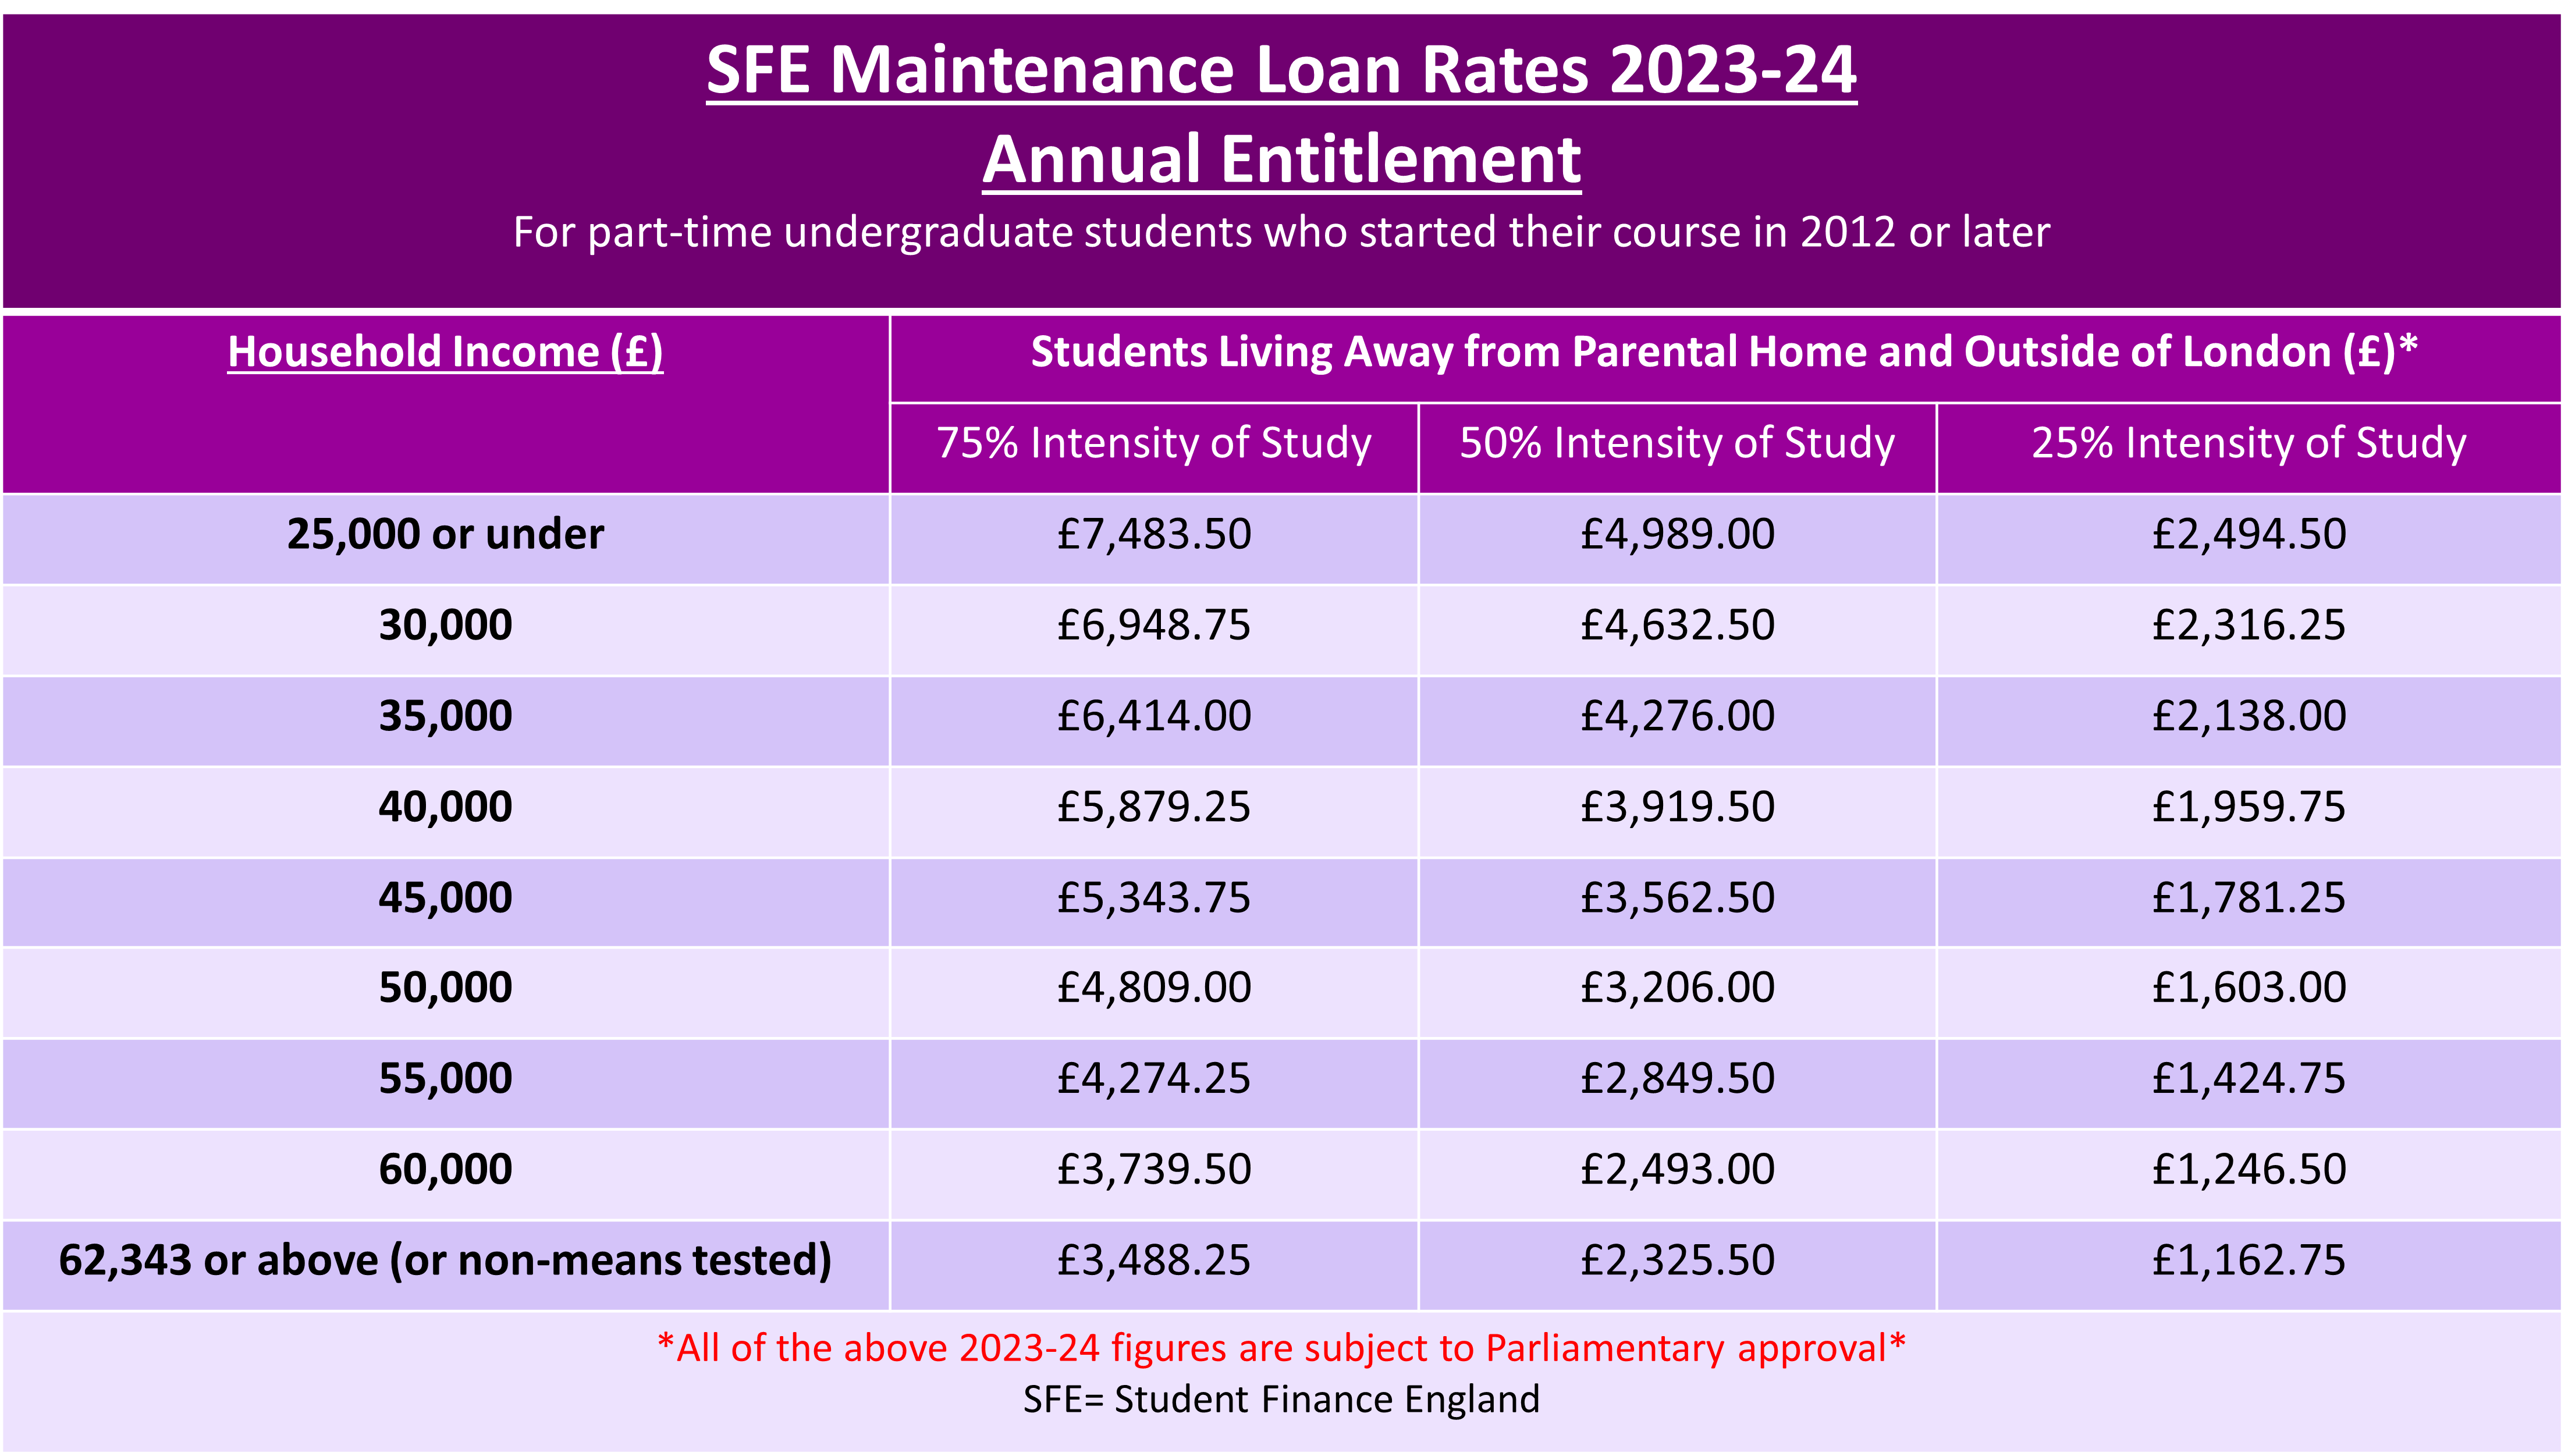 Table demonstrating Maintenance Loan rates for 23-24 by household income and course intensity. Subject to parliamentary approval.